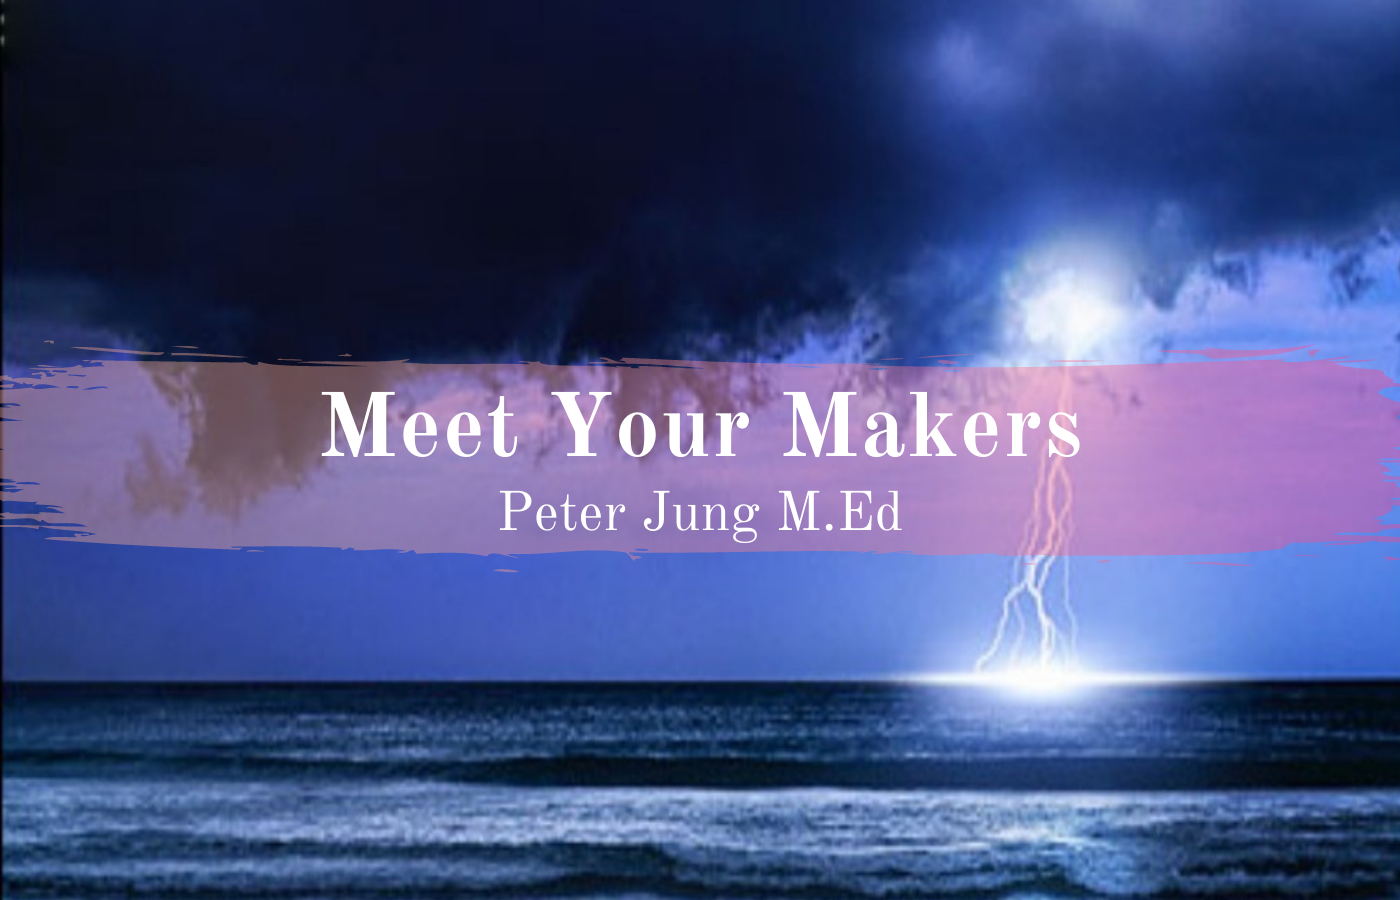 Test reads Meet Your Makers Peter Jung M.Ed over a stormy ocean